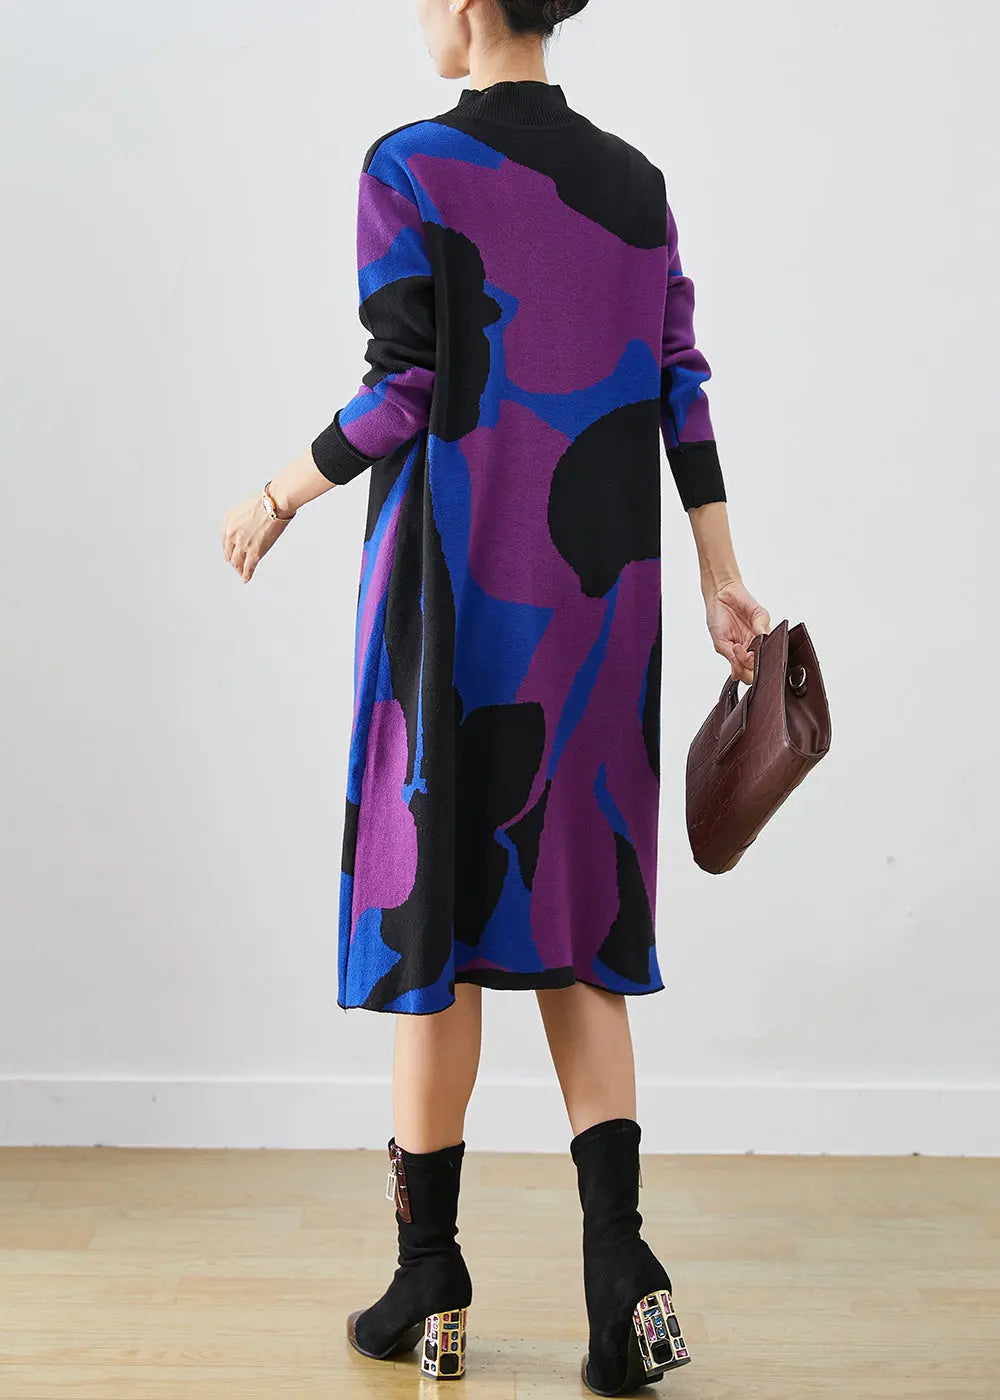 French Colorblock Turtle Neck Print Knit A Line Dresses Fall Ada Fashion